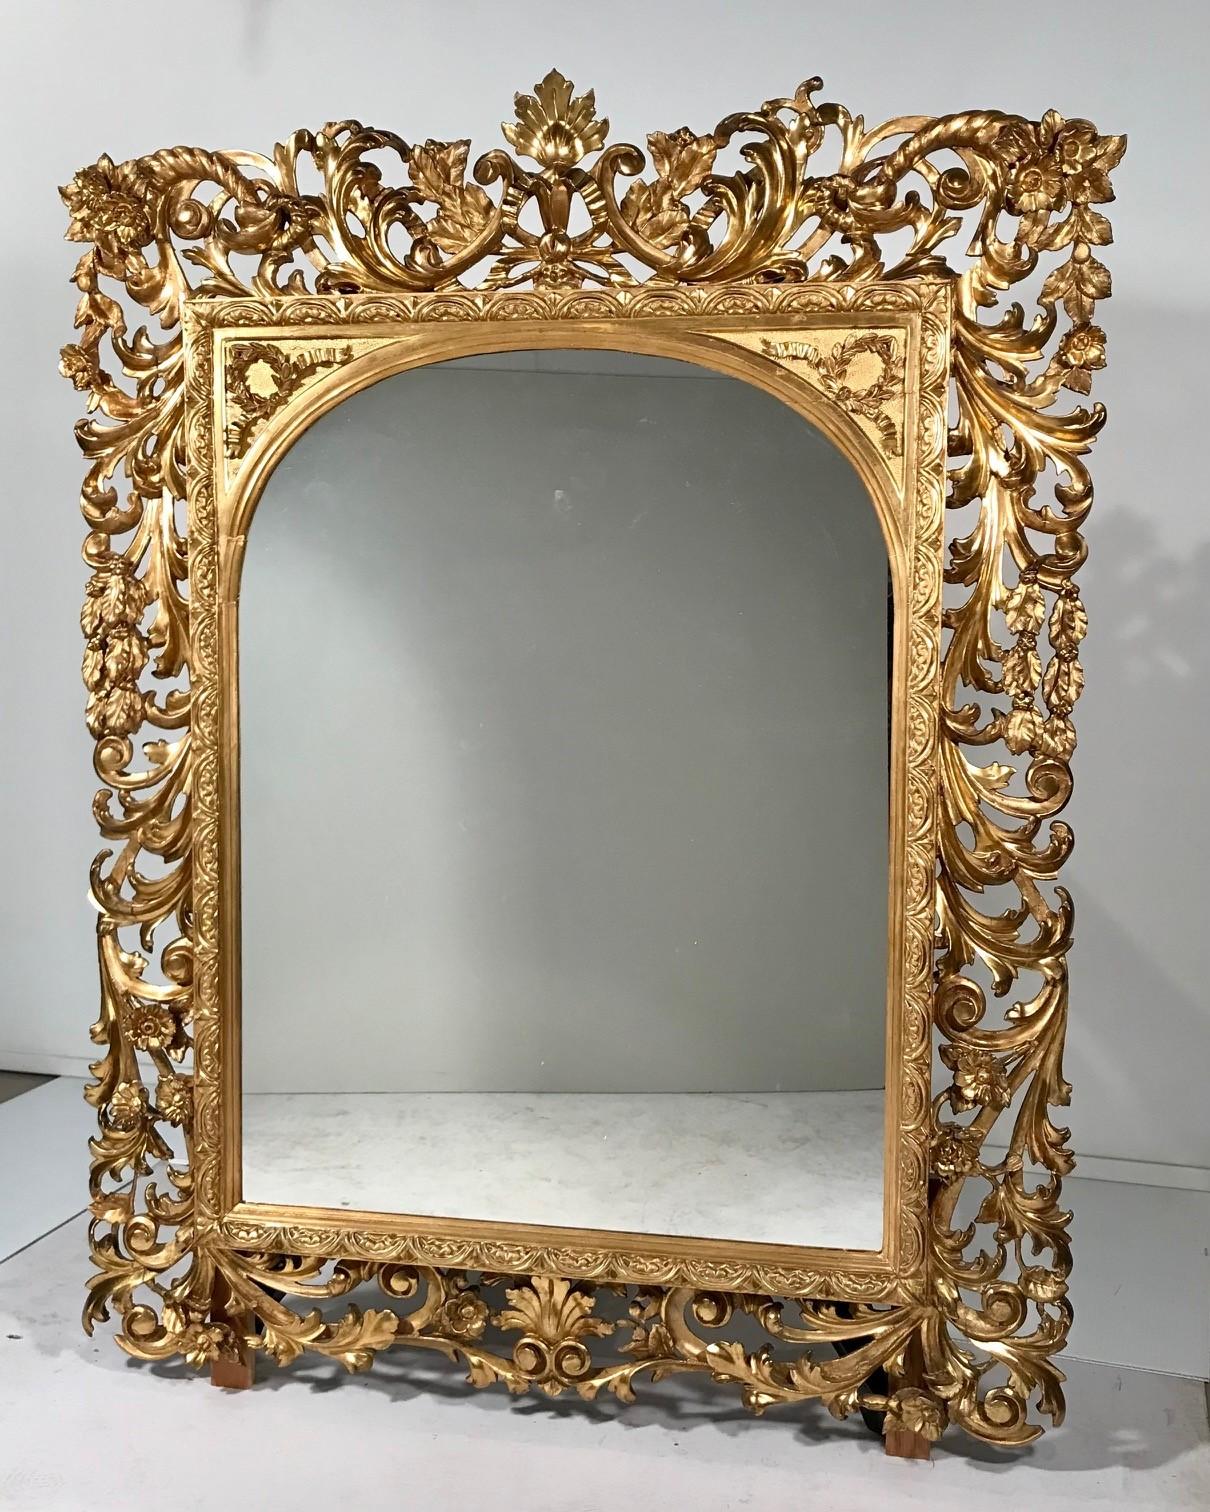 These Florentine mirrors are well-carved and gilt with scrolling acanthus and foliate motifs which create a lively background for the arched mirror plates. They are substantially, though not entirely, identical. A point of difference is the motifs